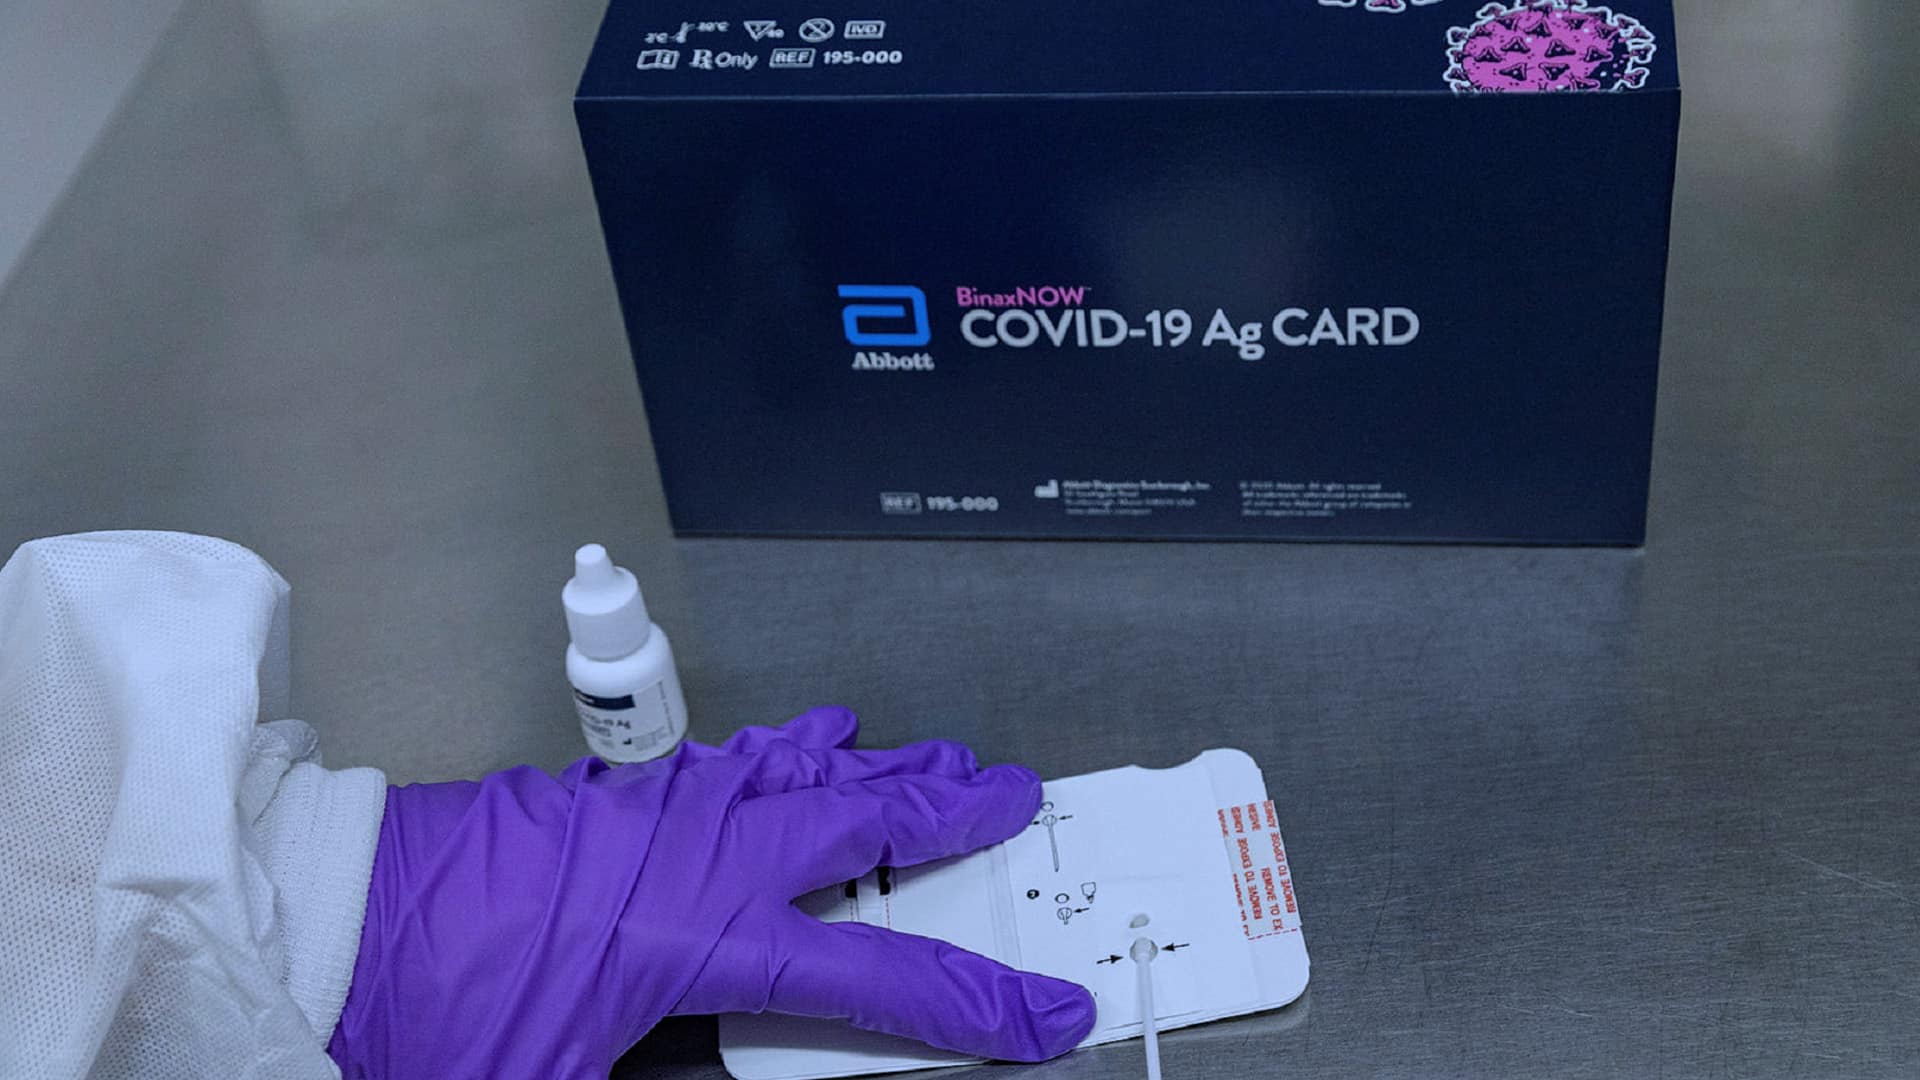 Now, you can detect Covid-19 using this home test kit. Check details